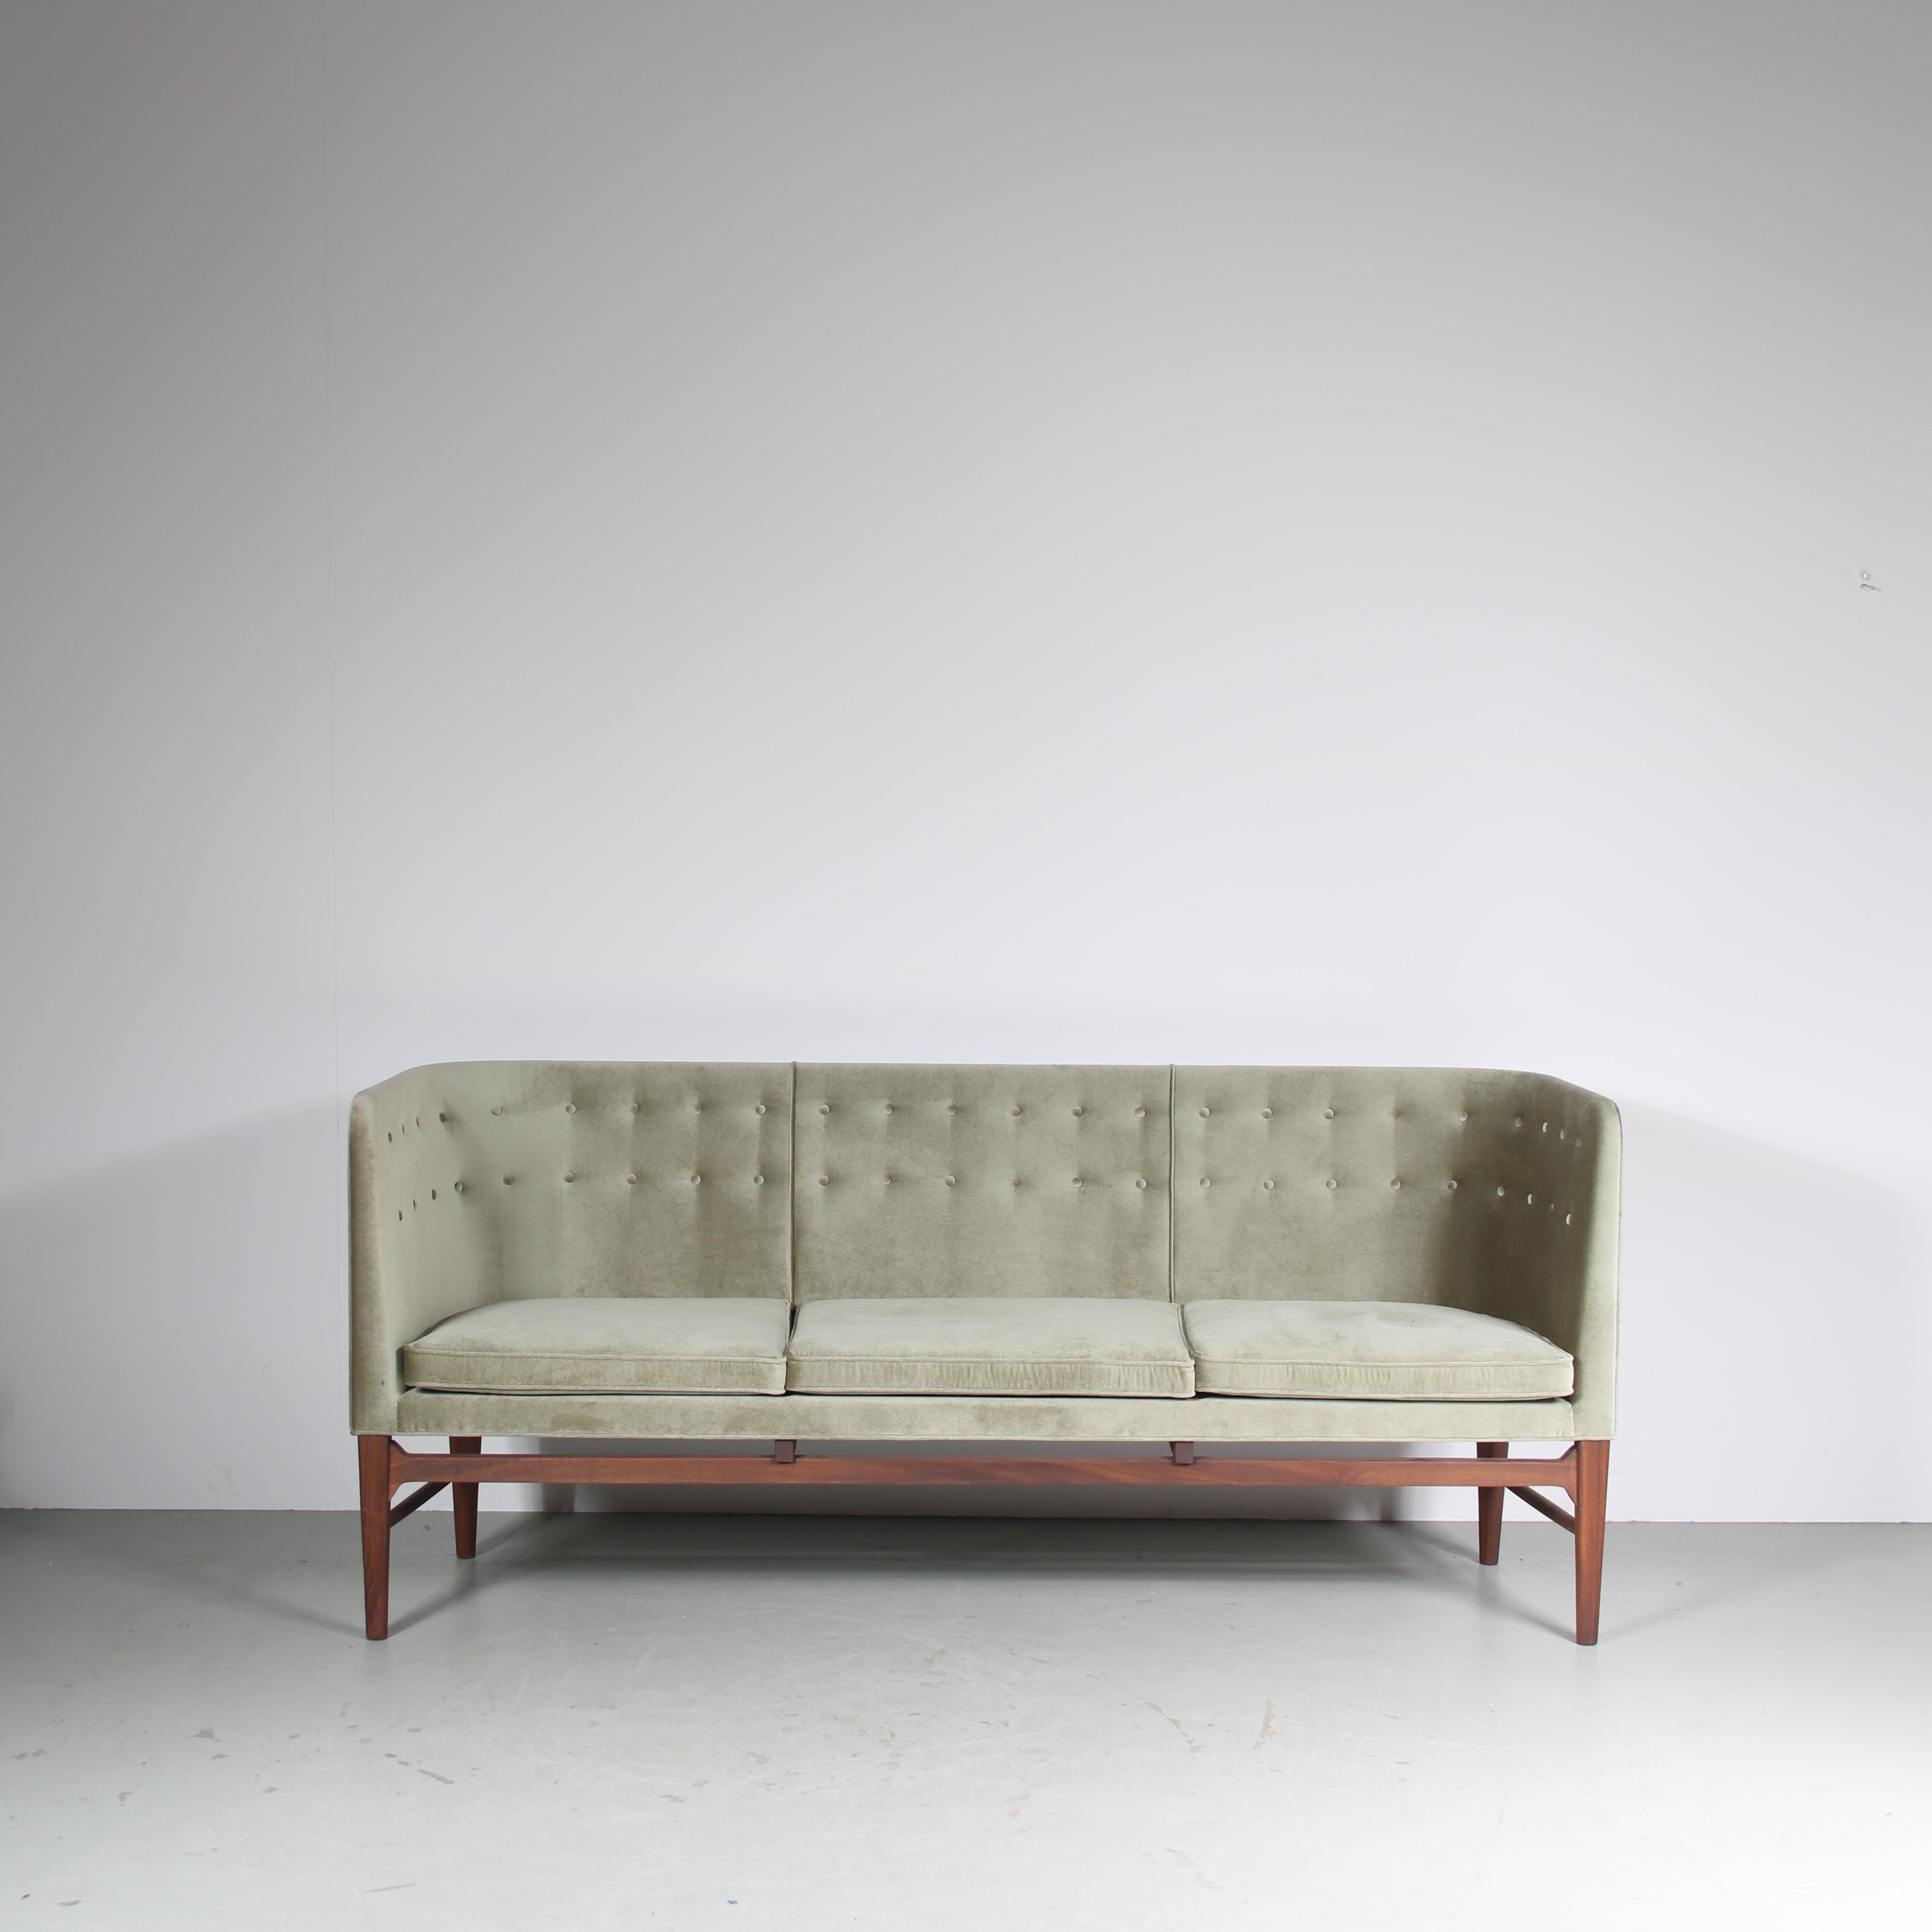 A beautiful sofa, model Mayor AJ5, designed by Arne Jacobsen and Flemming Lassen in 1939 and manufactured by &Tradition in Denmark in the 2020s.

Made of high quality oak wood with beautiful green fabric upholstery that is soft to the touch. It is